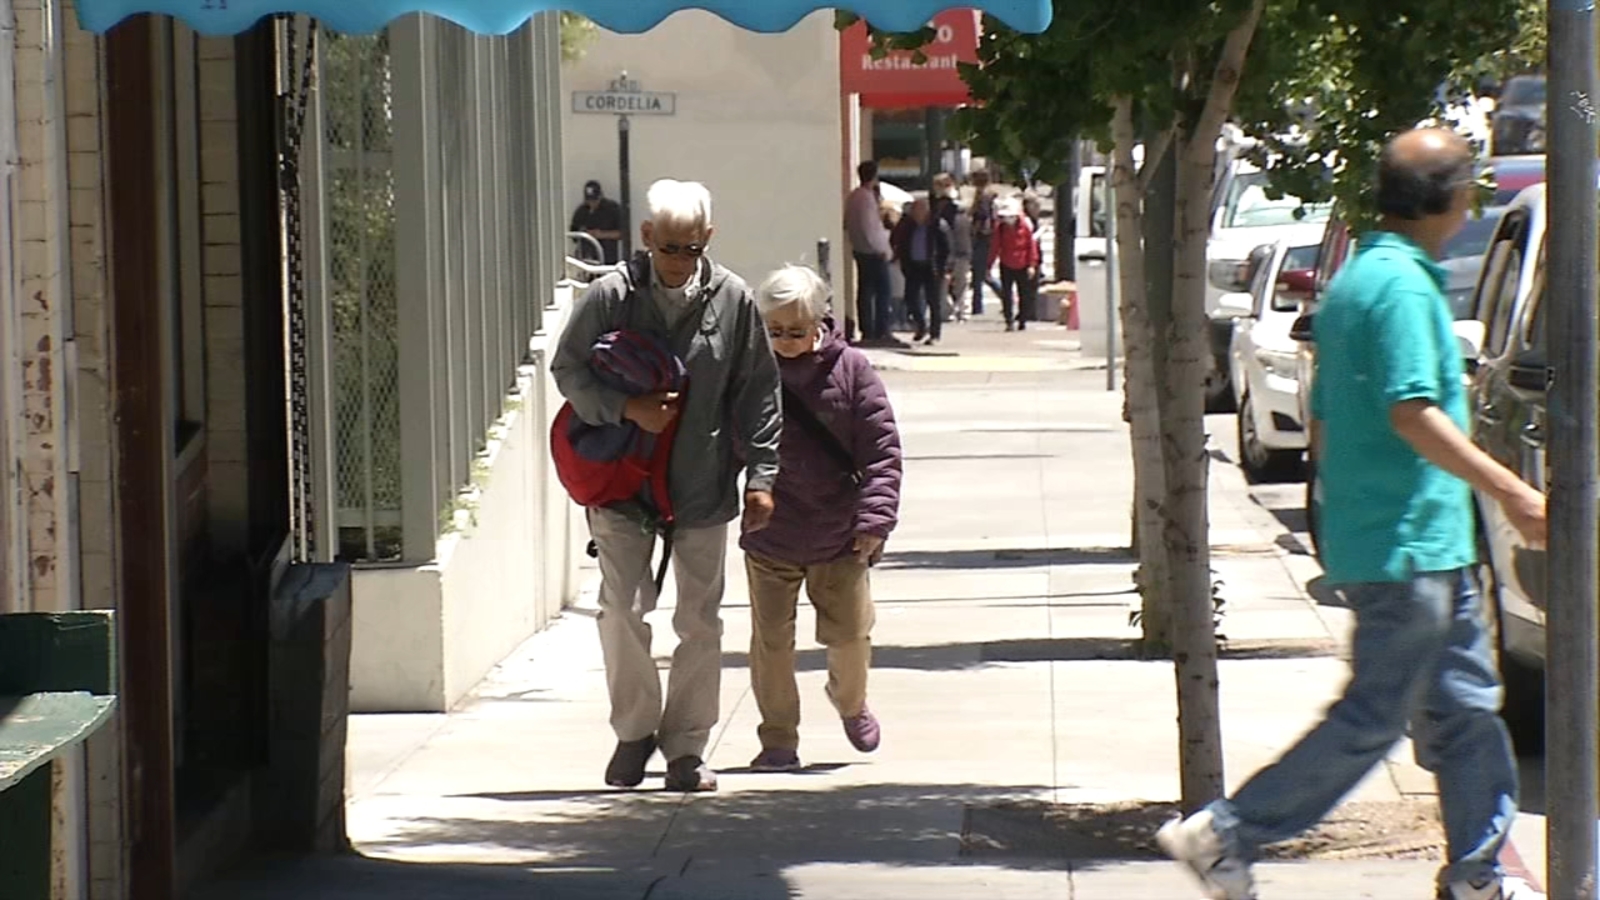 Financial elder abuse: Authorities educate San Francisco Chinatown seniors to prevent loss [Video]